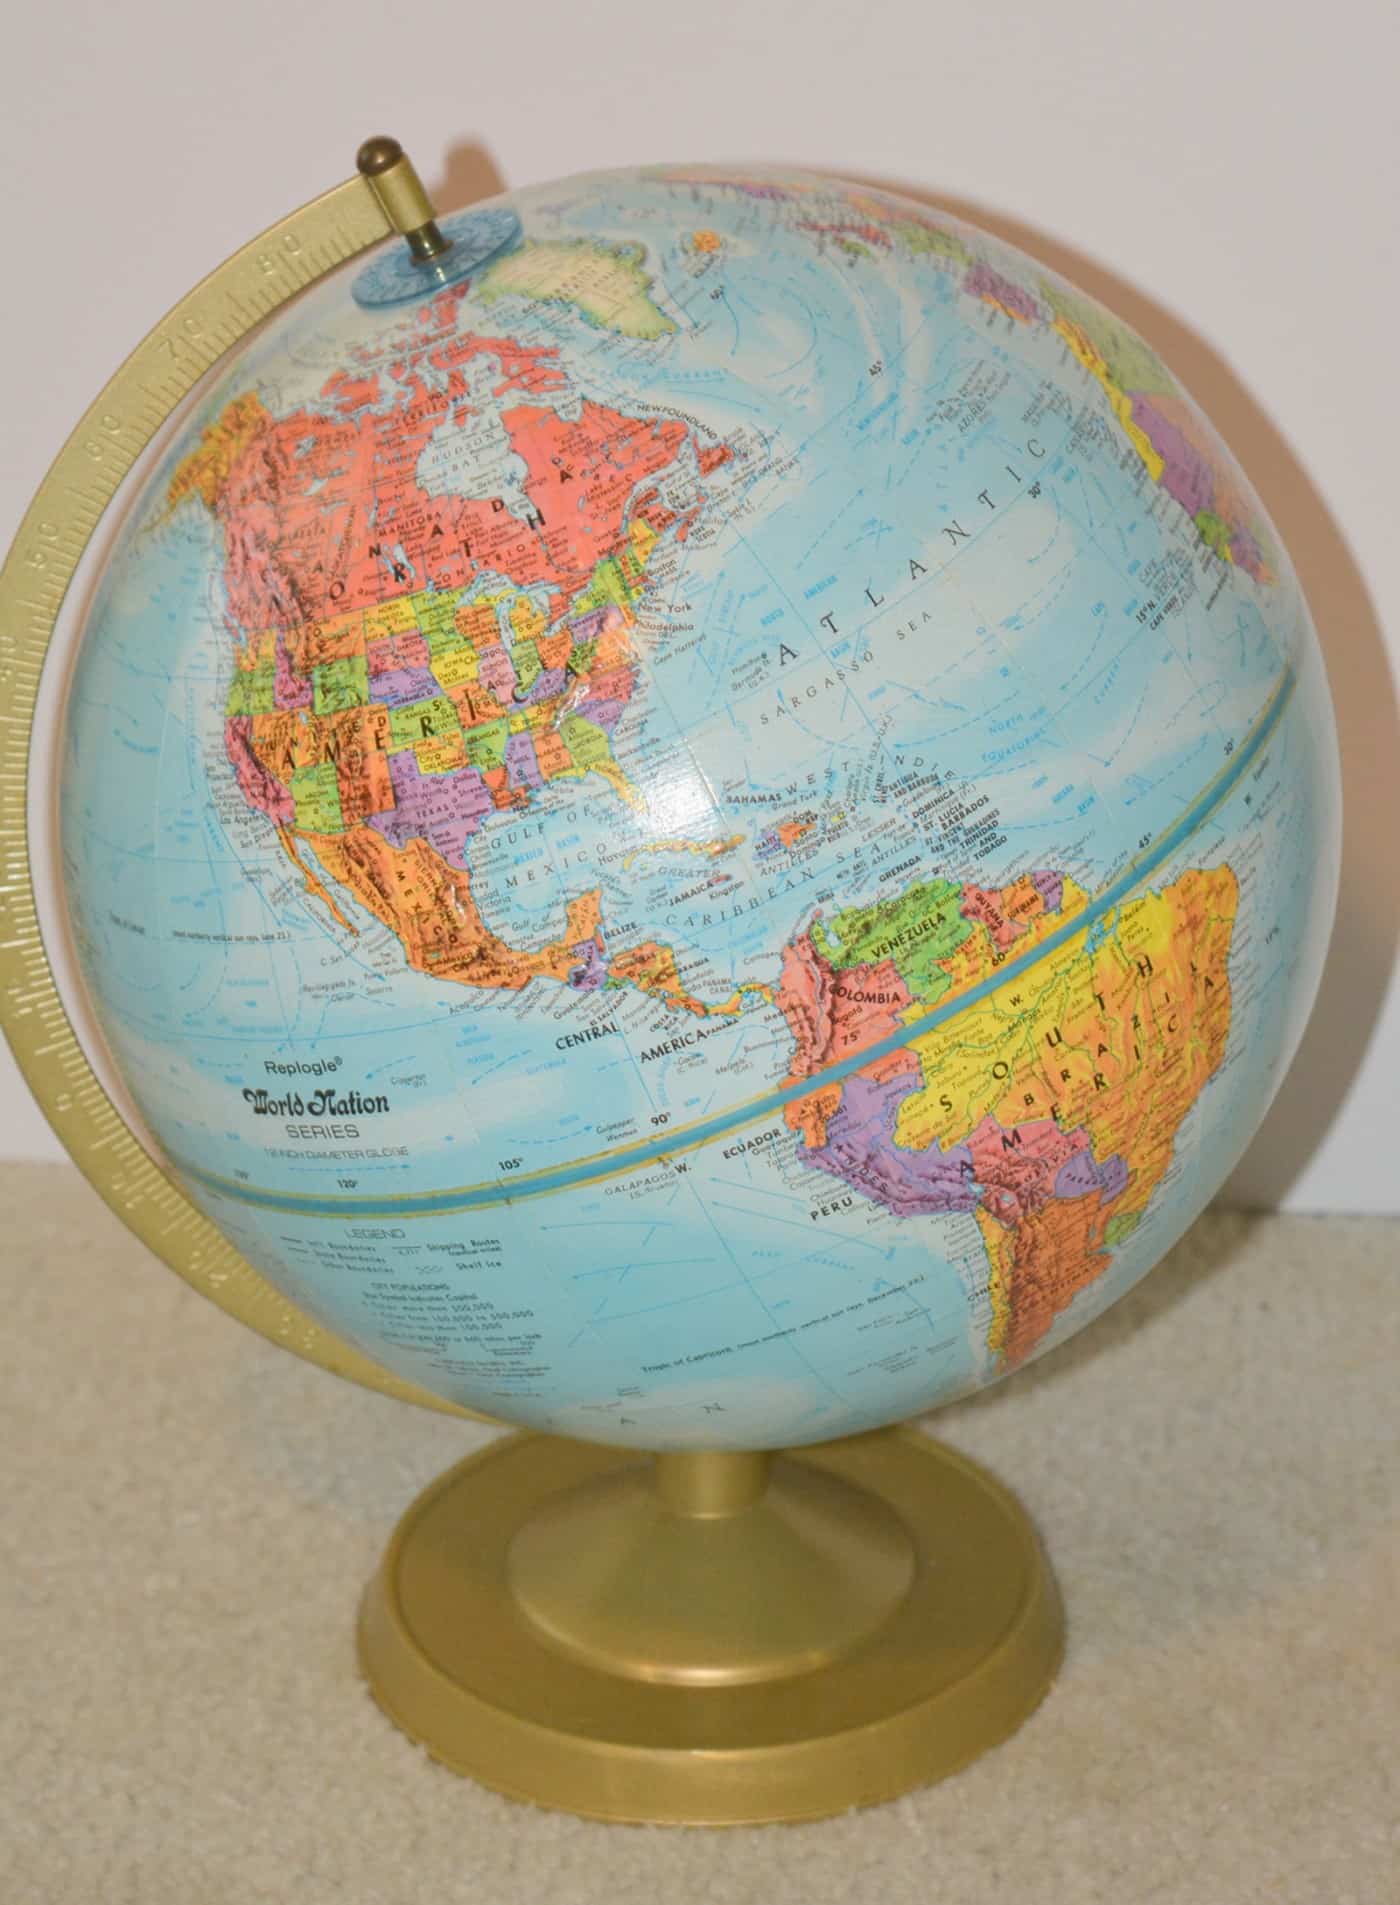 World globe after it has been cleaned